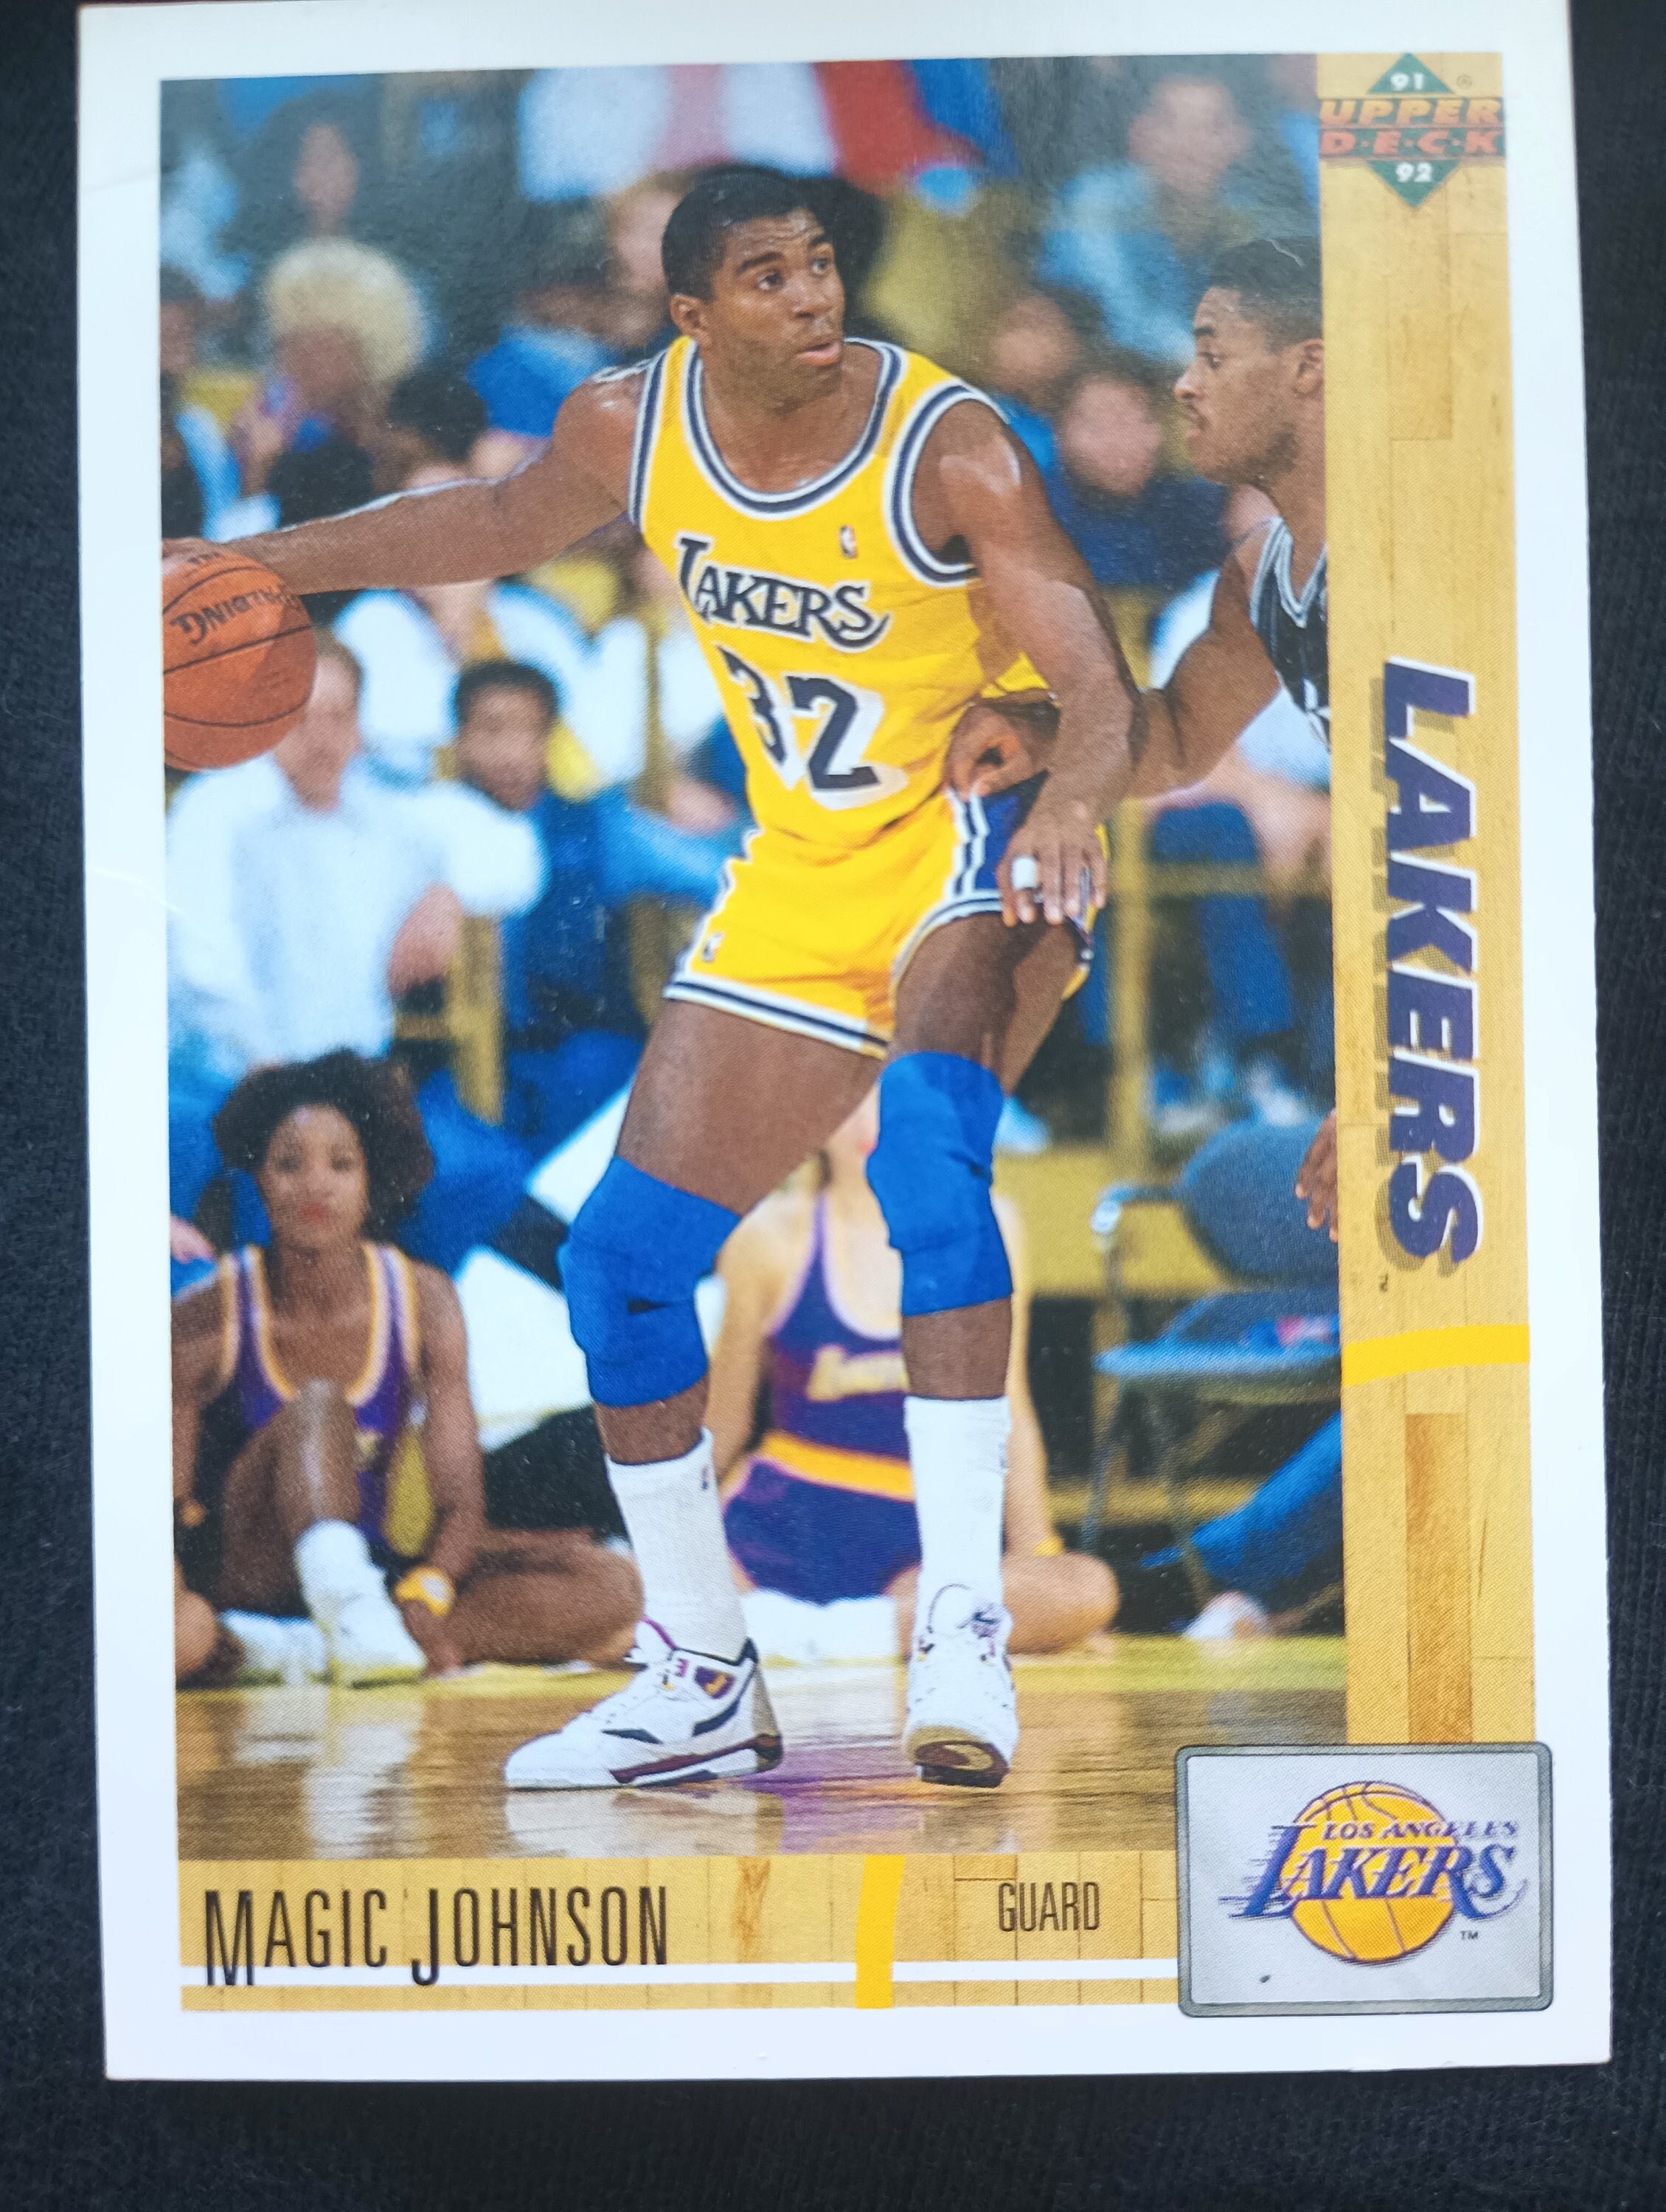 Magic Johnson 1979-80 Real Mitchell & Ness #32 Lakers Rookie